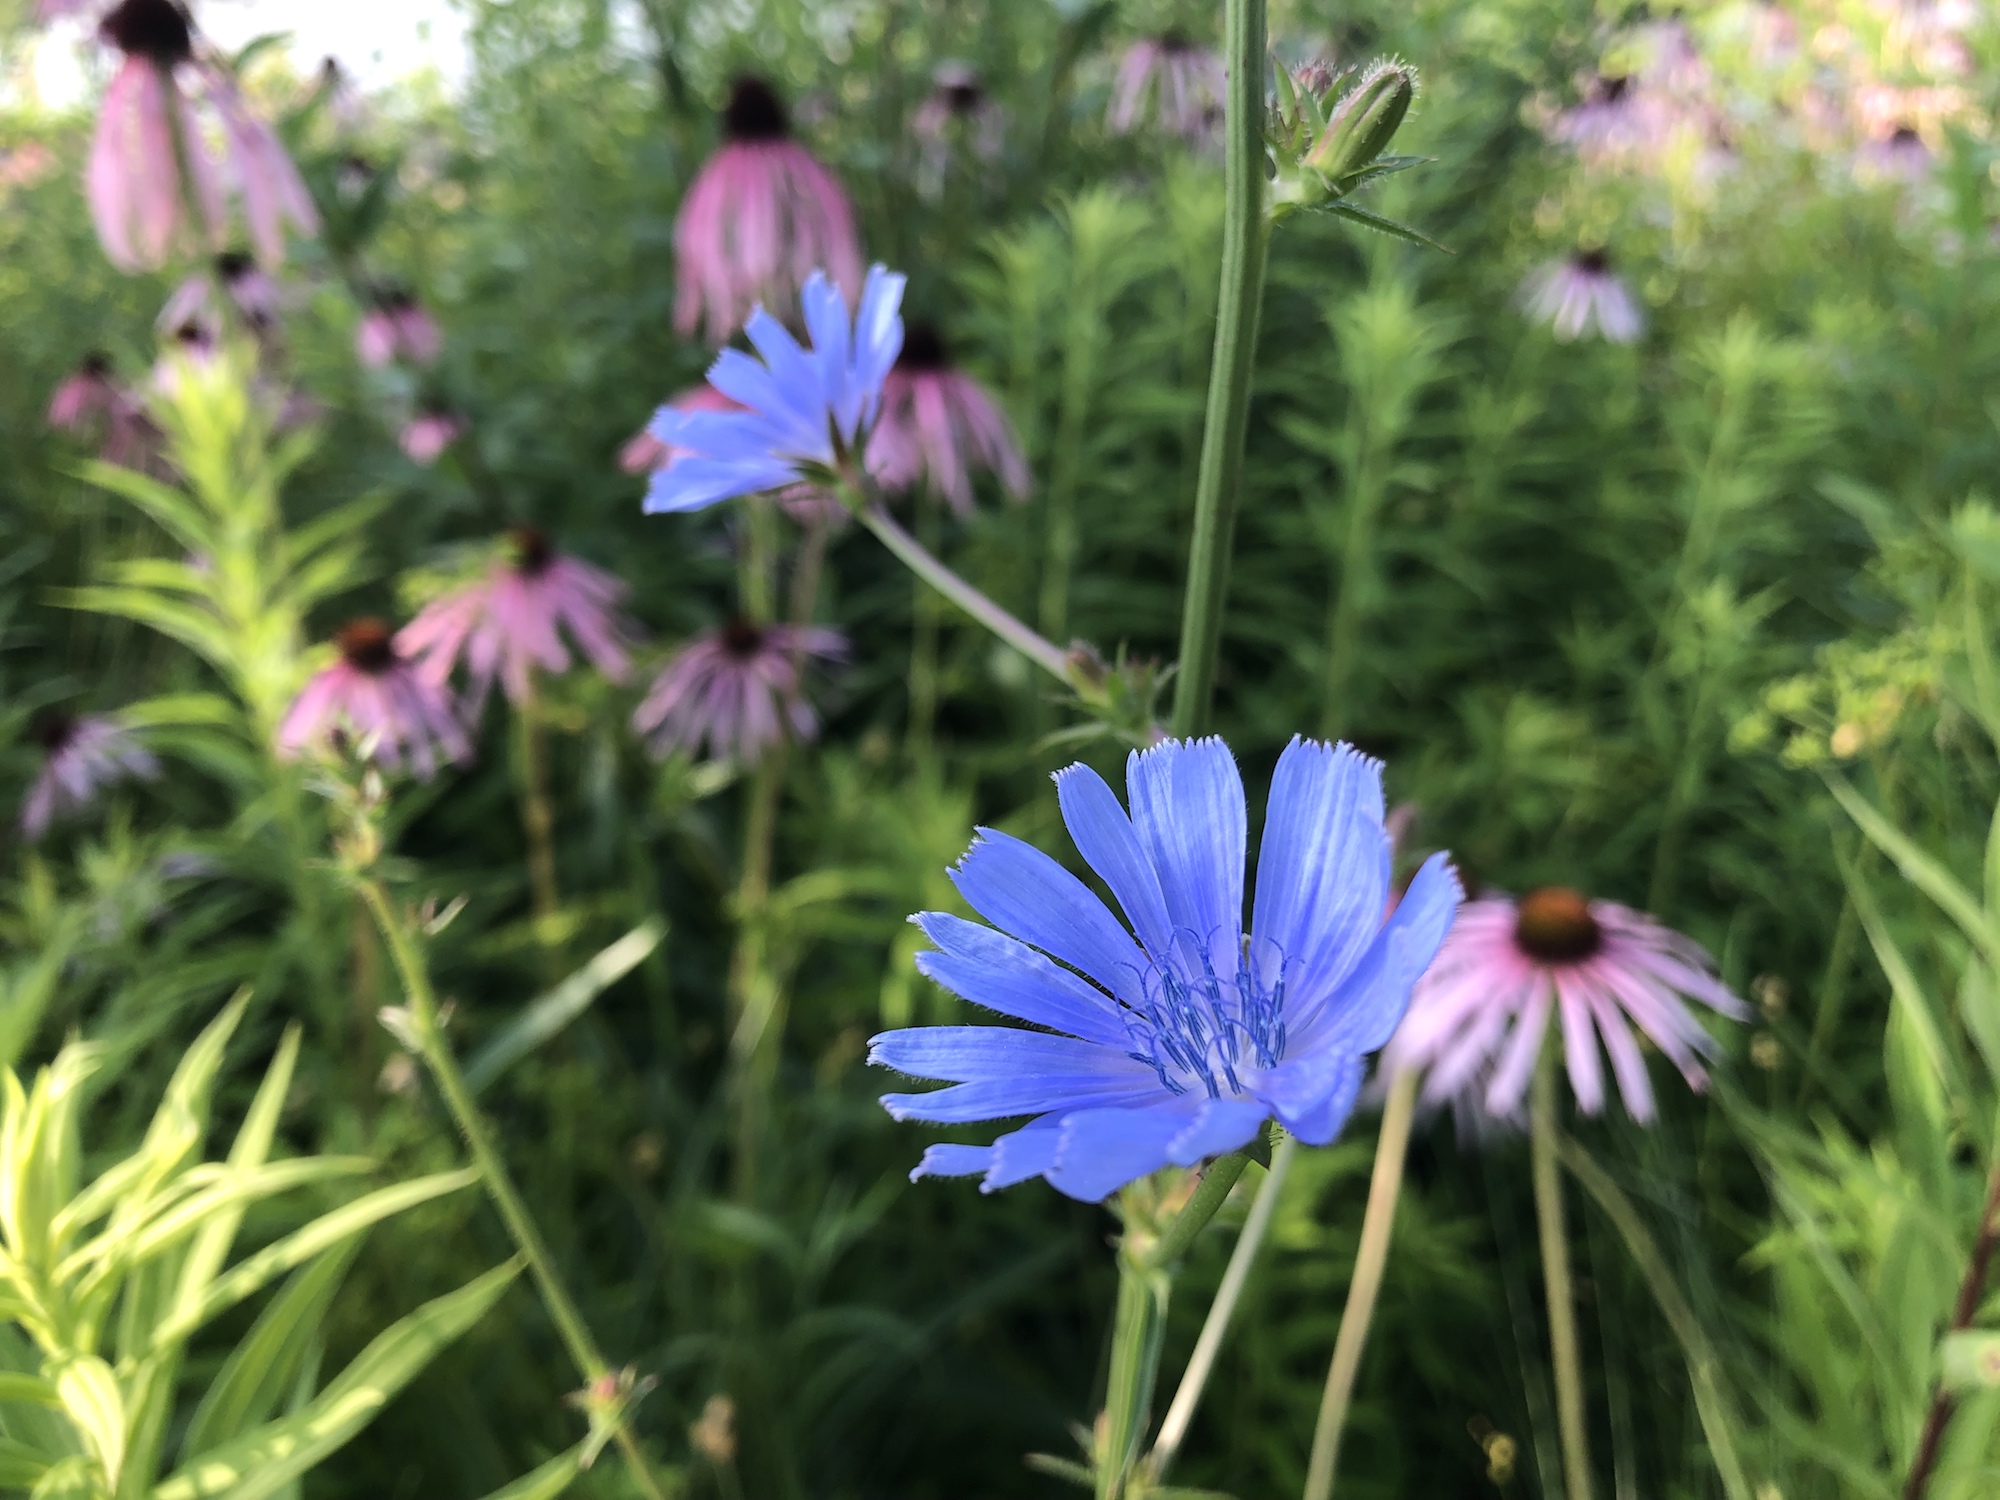 Chicory on banks of Retaining Pond in Madison, Wisconsin on July 8, 2019.